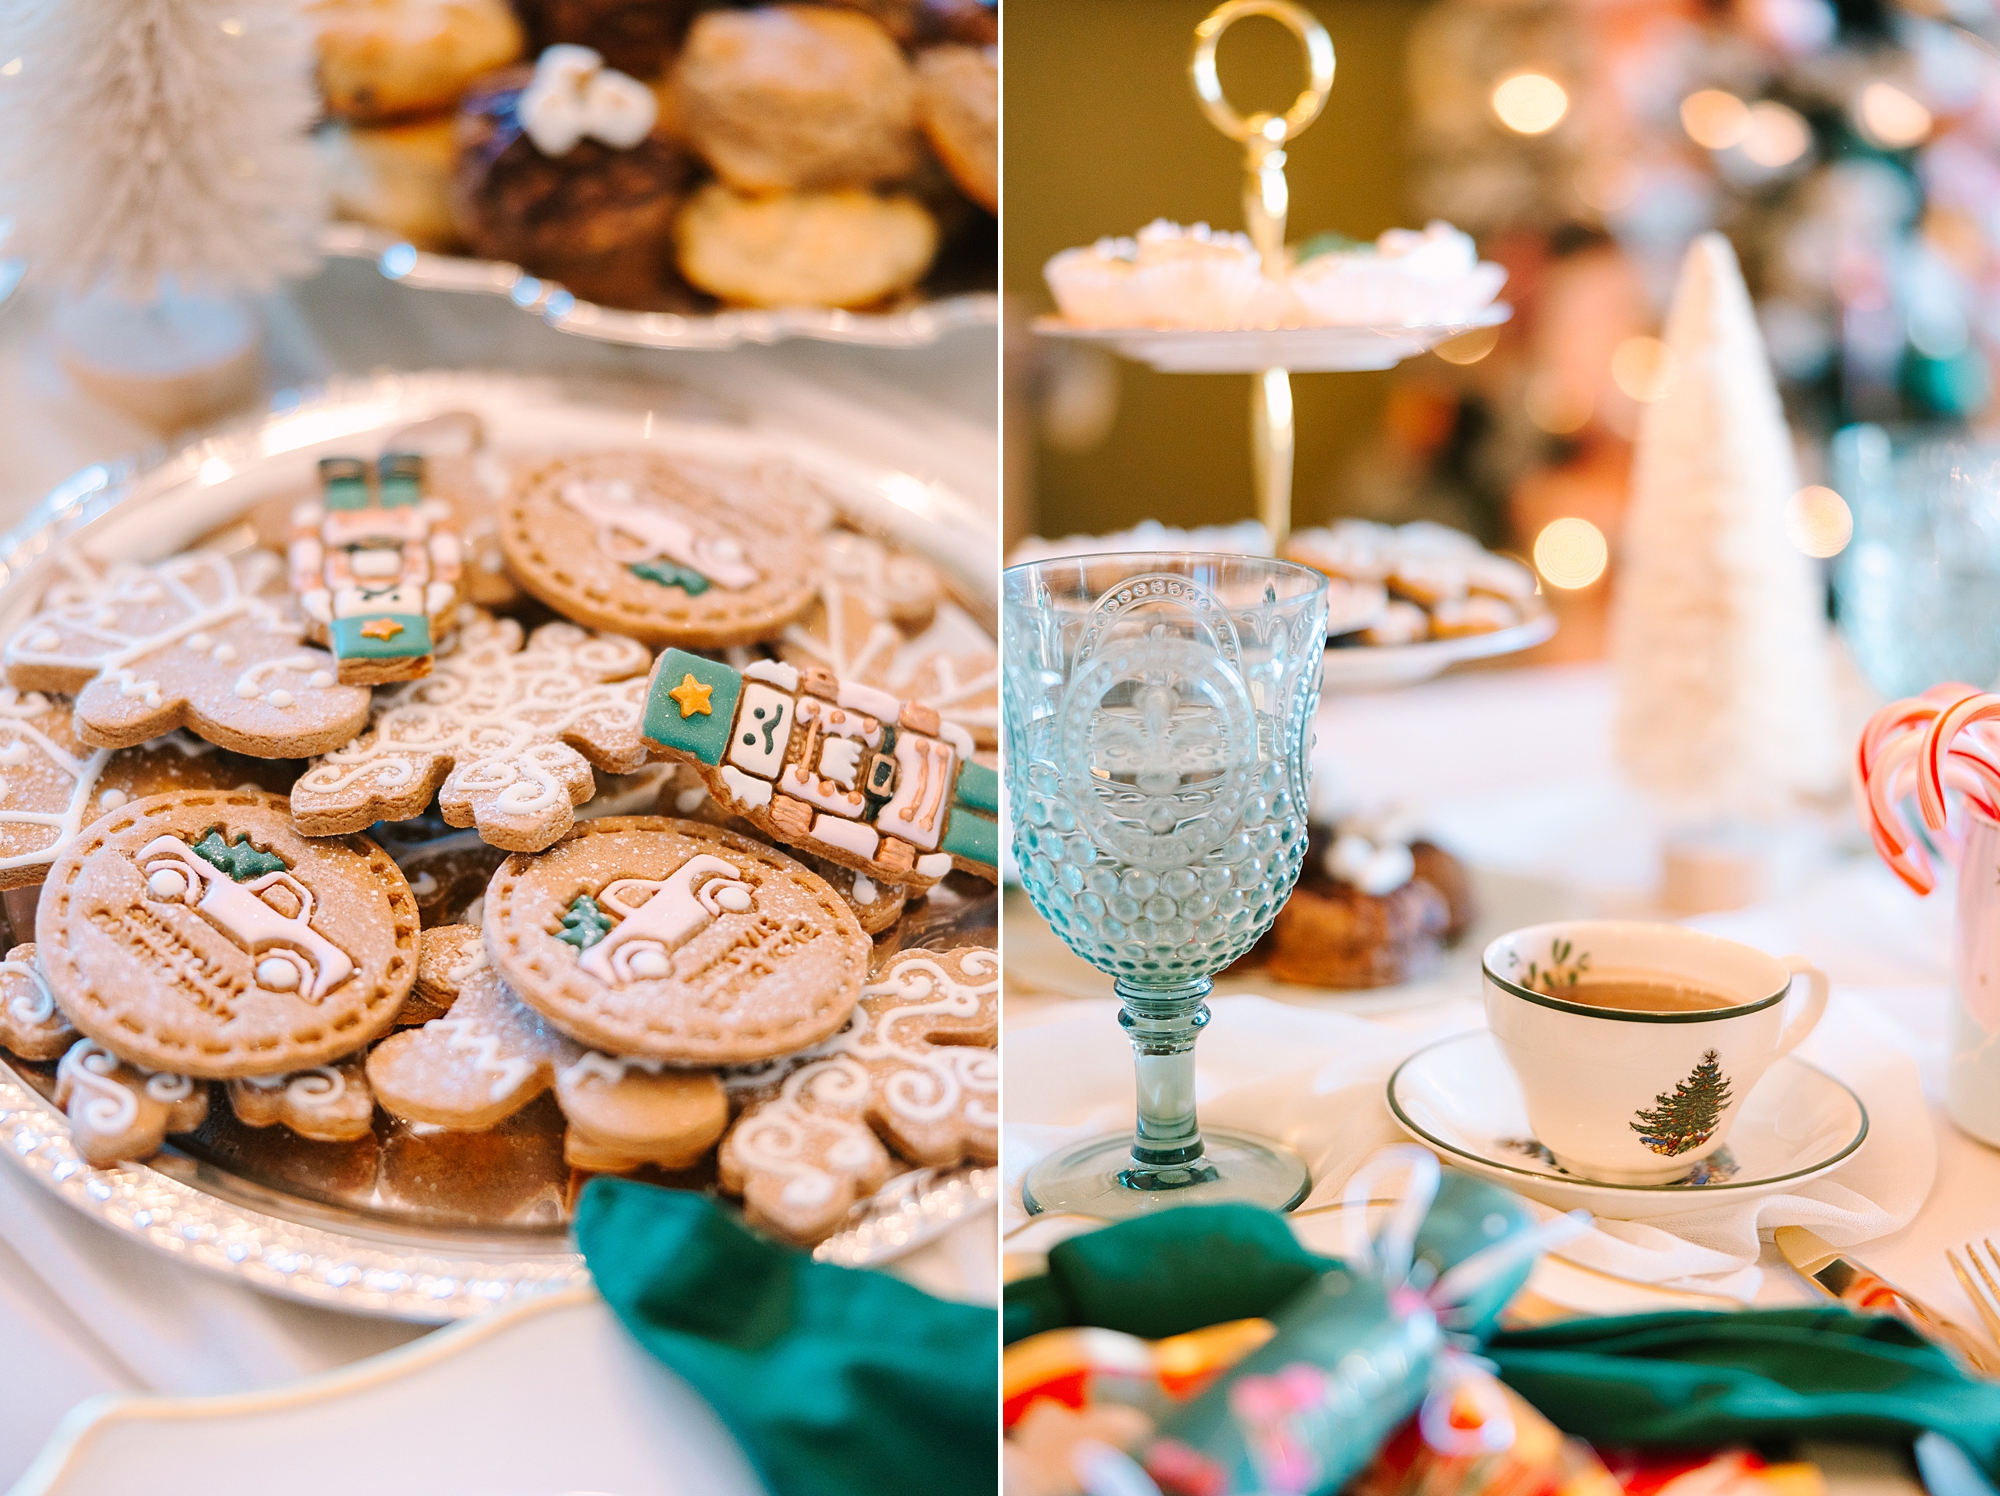 Nutcracker inspired tea party with Pretty Lovely Tea with vintage glassware and holiday cookies